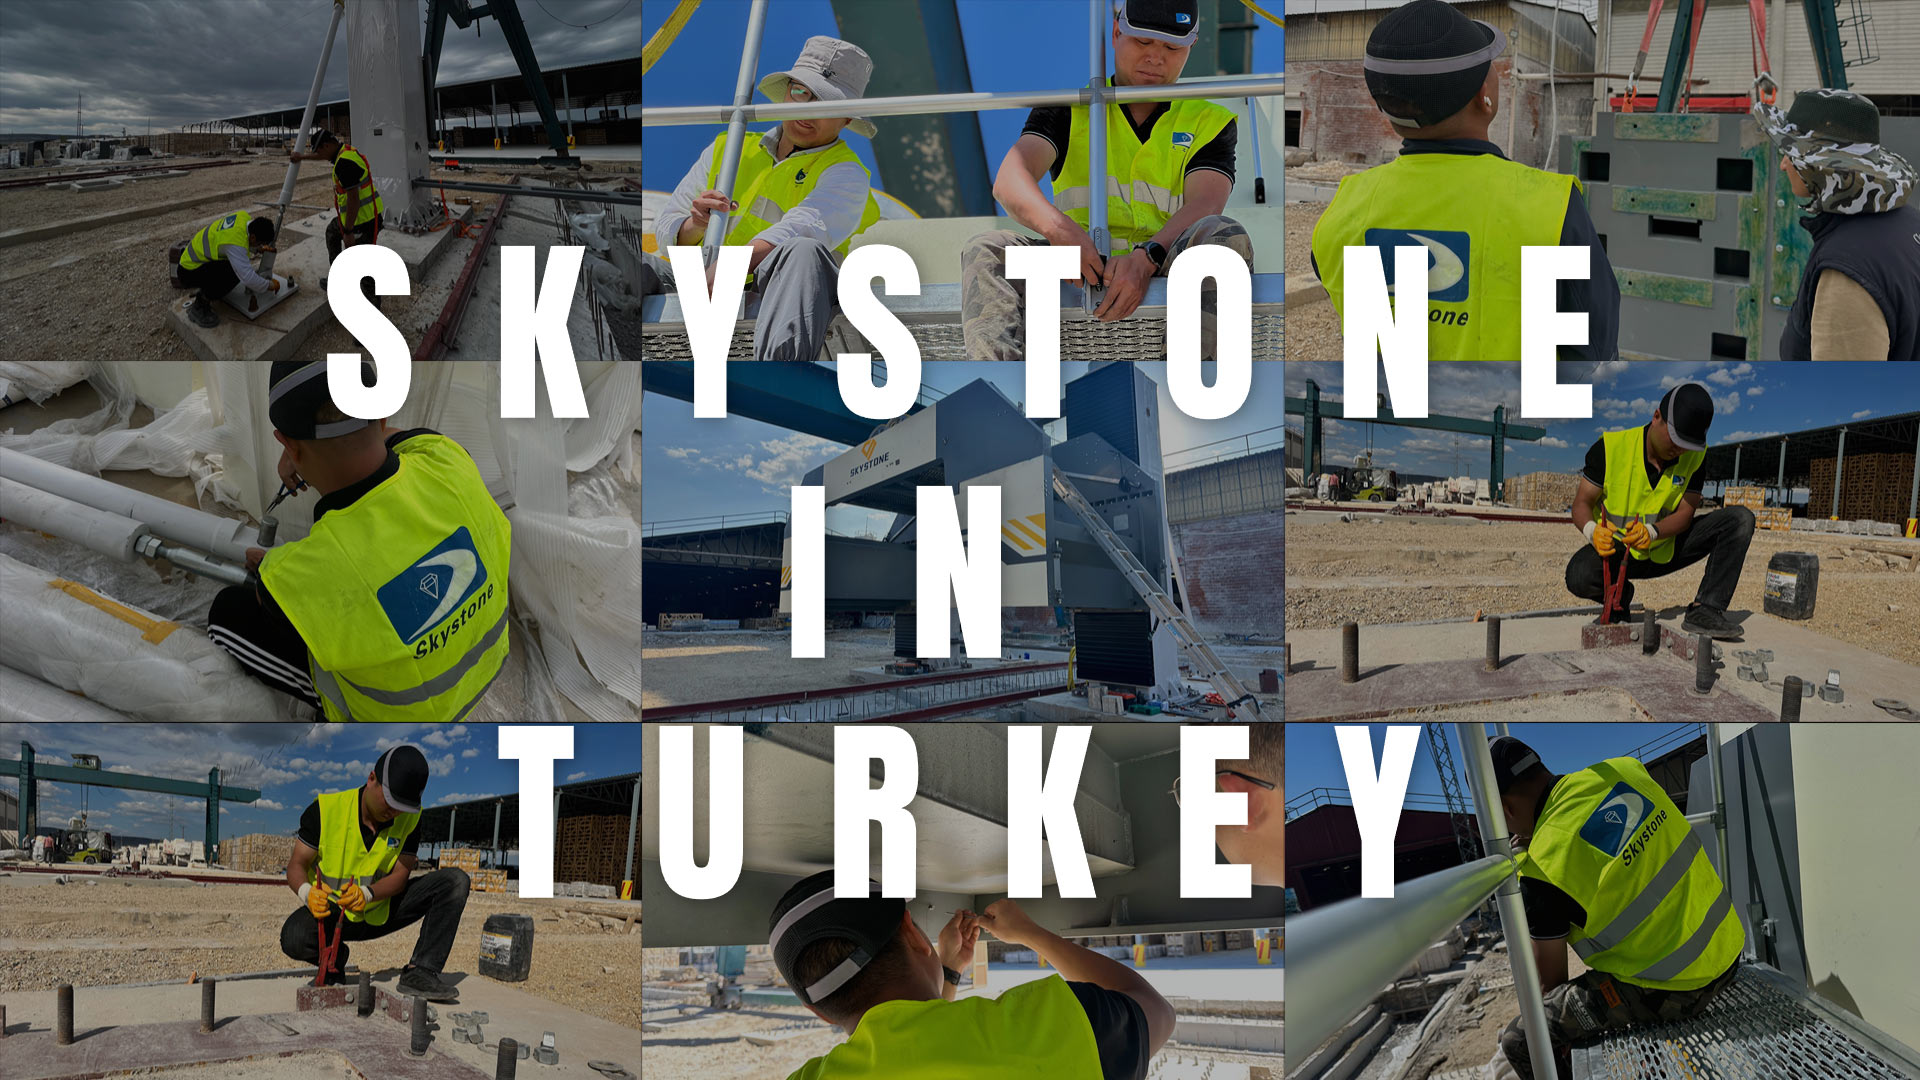 Skystone Team Provides Technical Service and Installation of New multi wire saw machine in Turkey